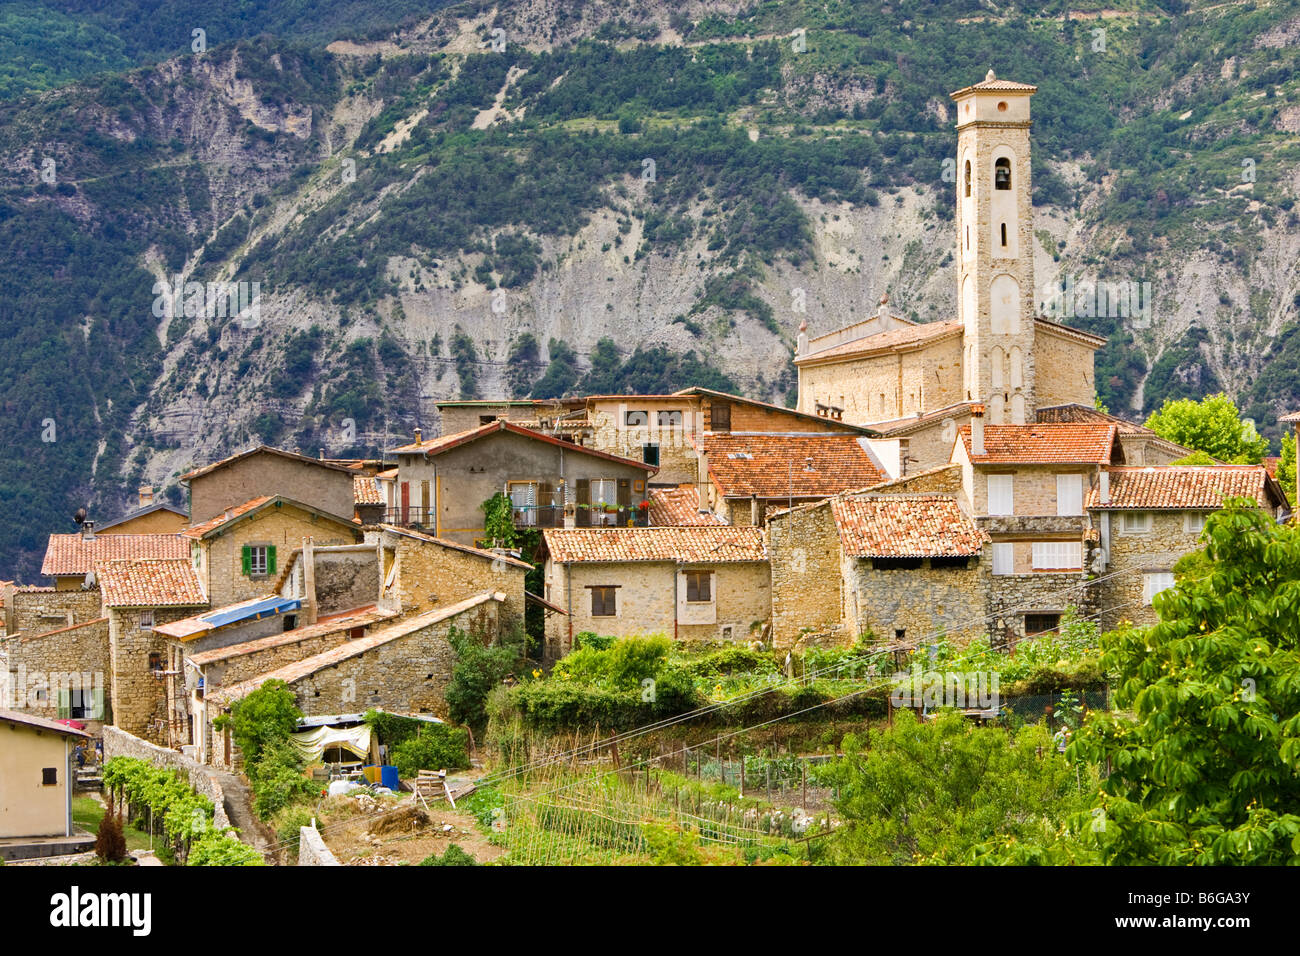 Alps village of Clans, Tinee Valley, Mercantour National Park, Alpes Maritimes, France Stock Photo